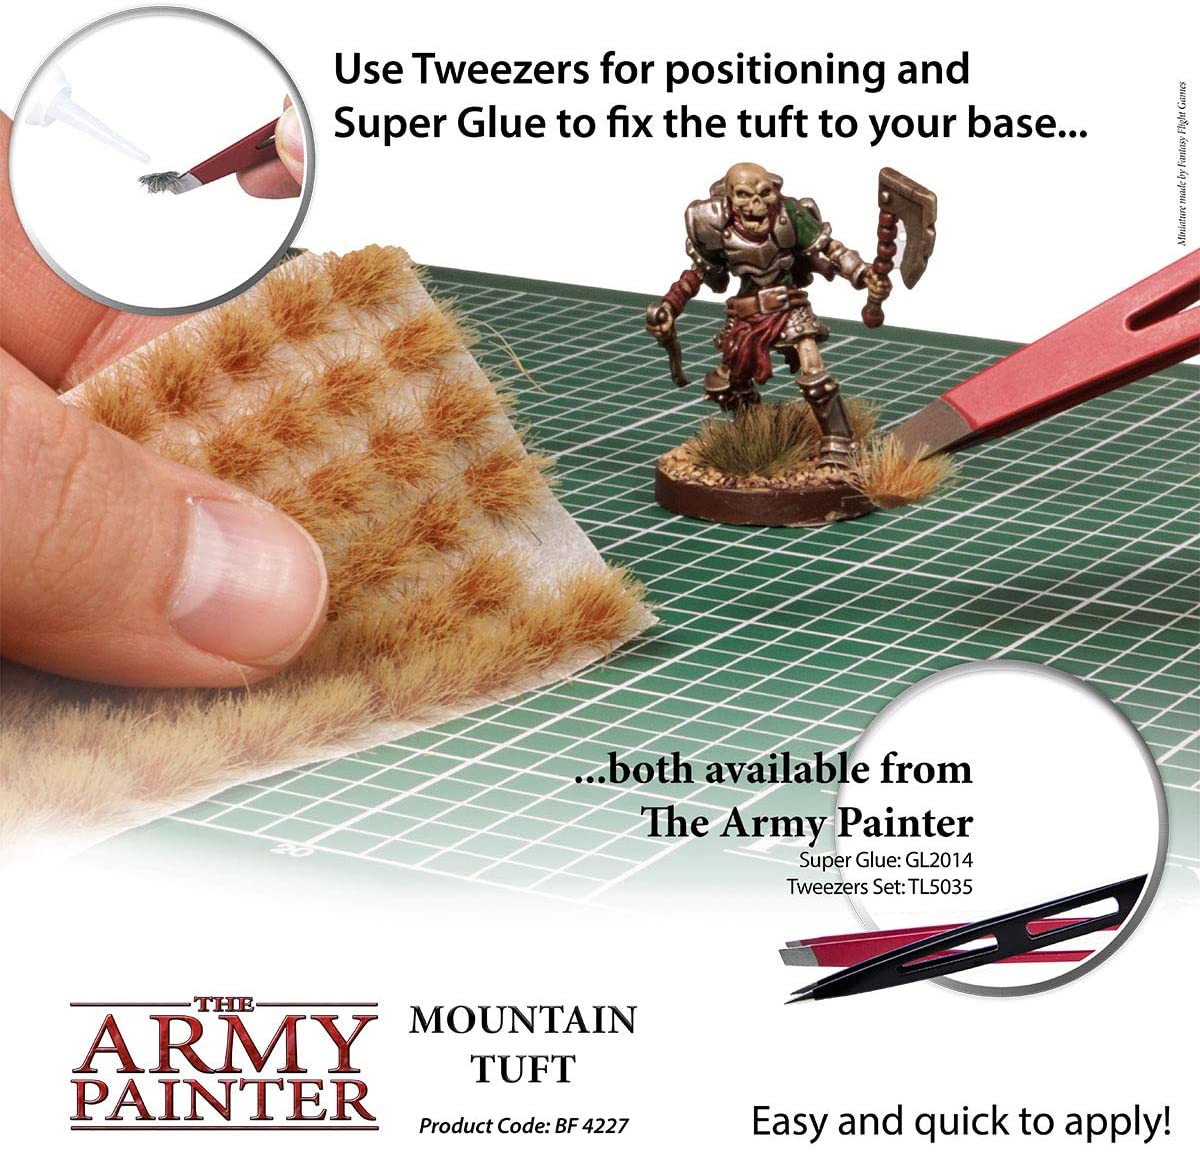 The Army Painter - Tufts: Mountain